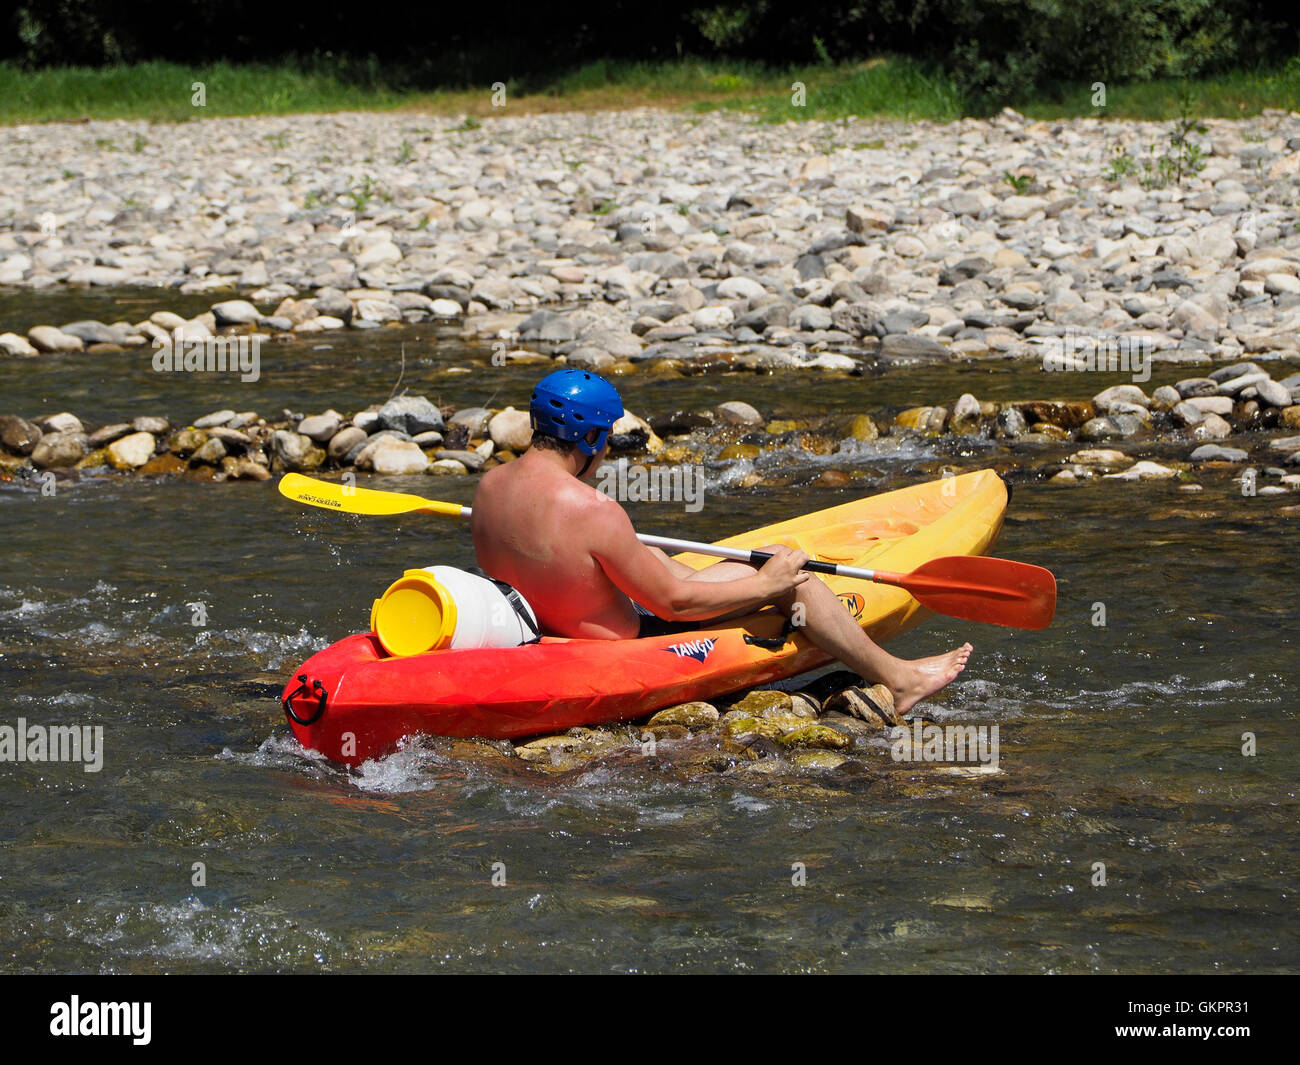 Making a canoe trip is a very popular activity in France, this is man is running into a typical problem on the Herault river. Stock Photo